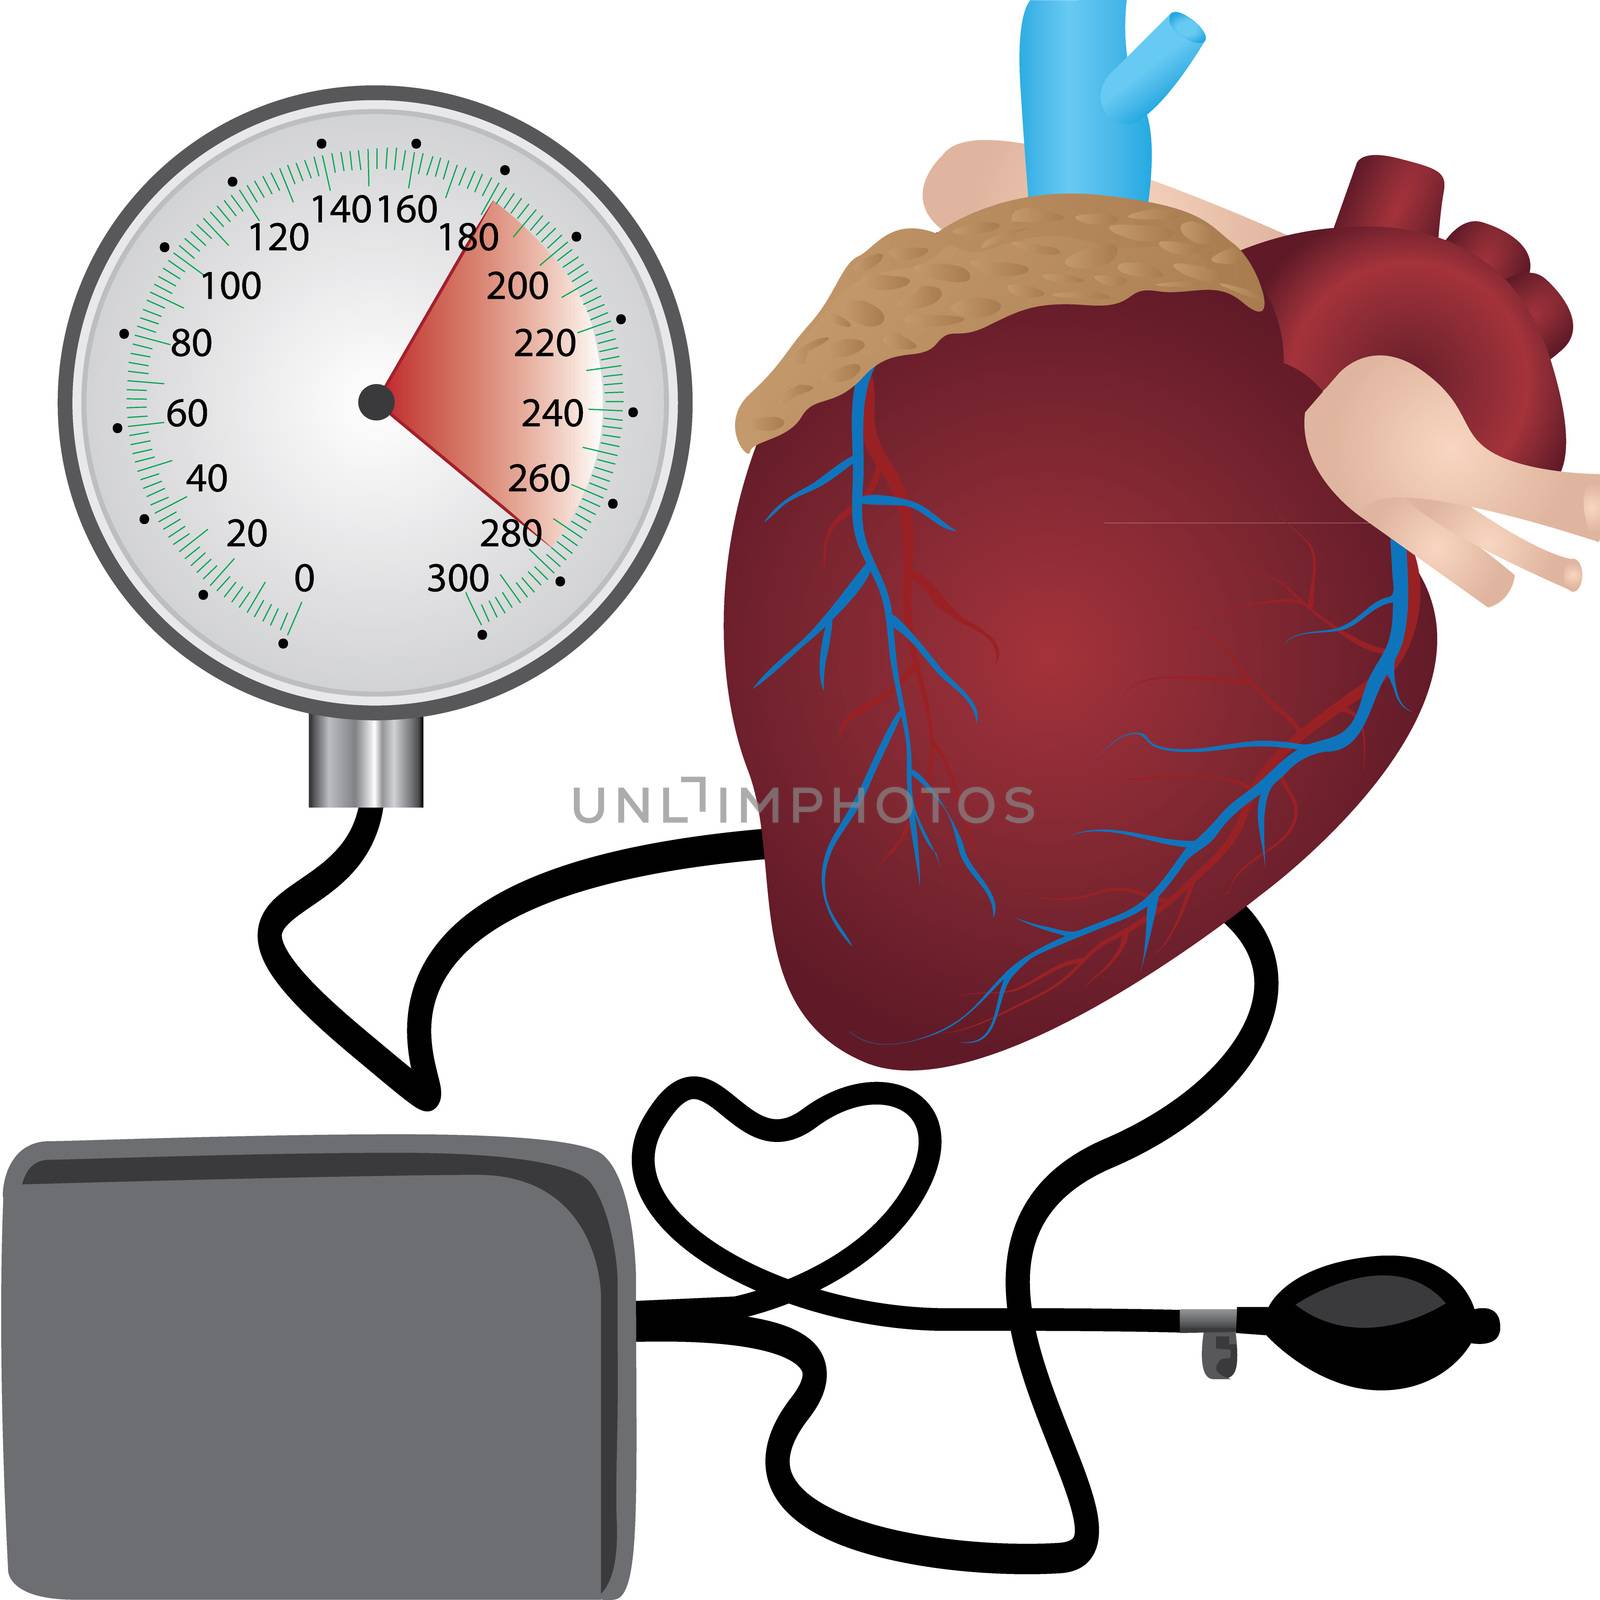 Blood pressure measuring  cardio exam  vector illustration on a white background